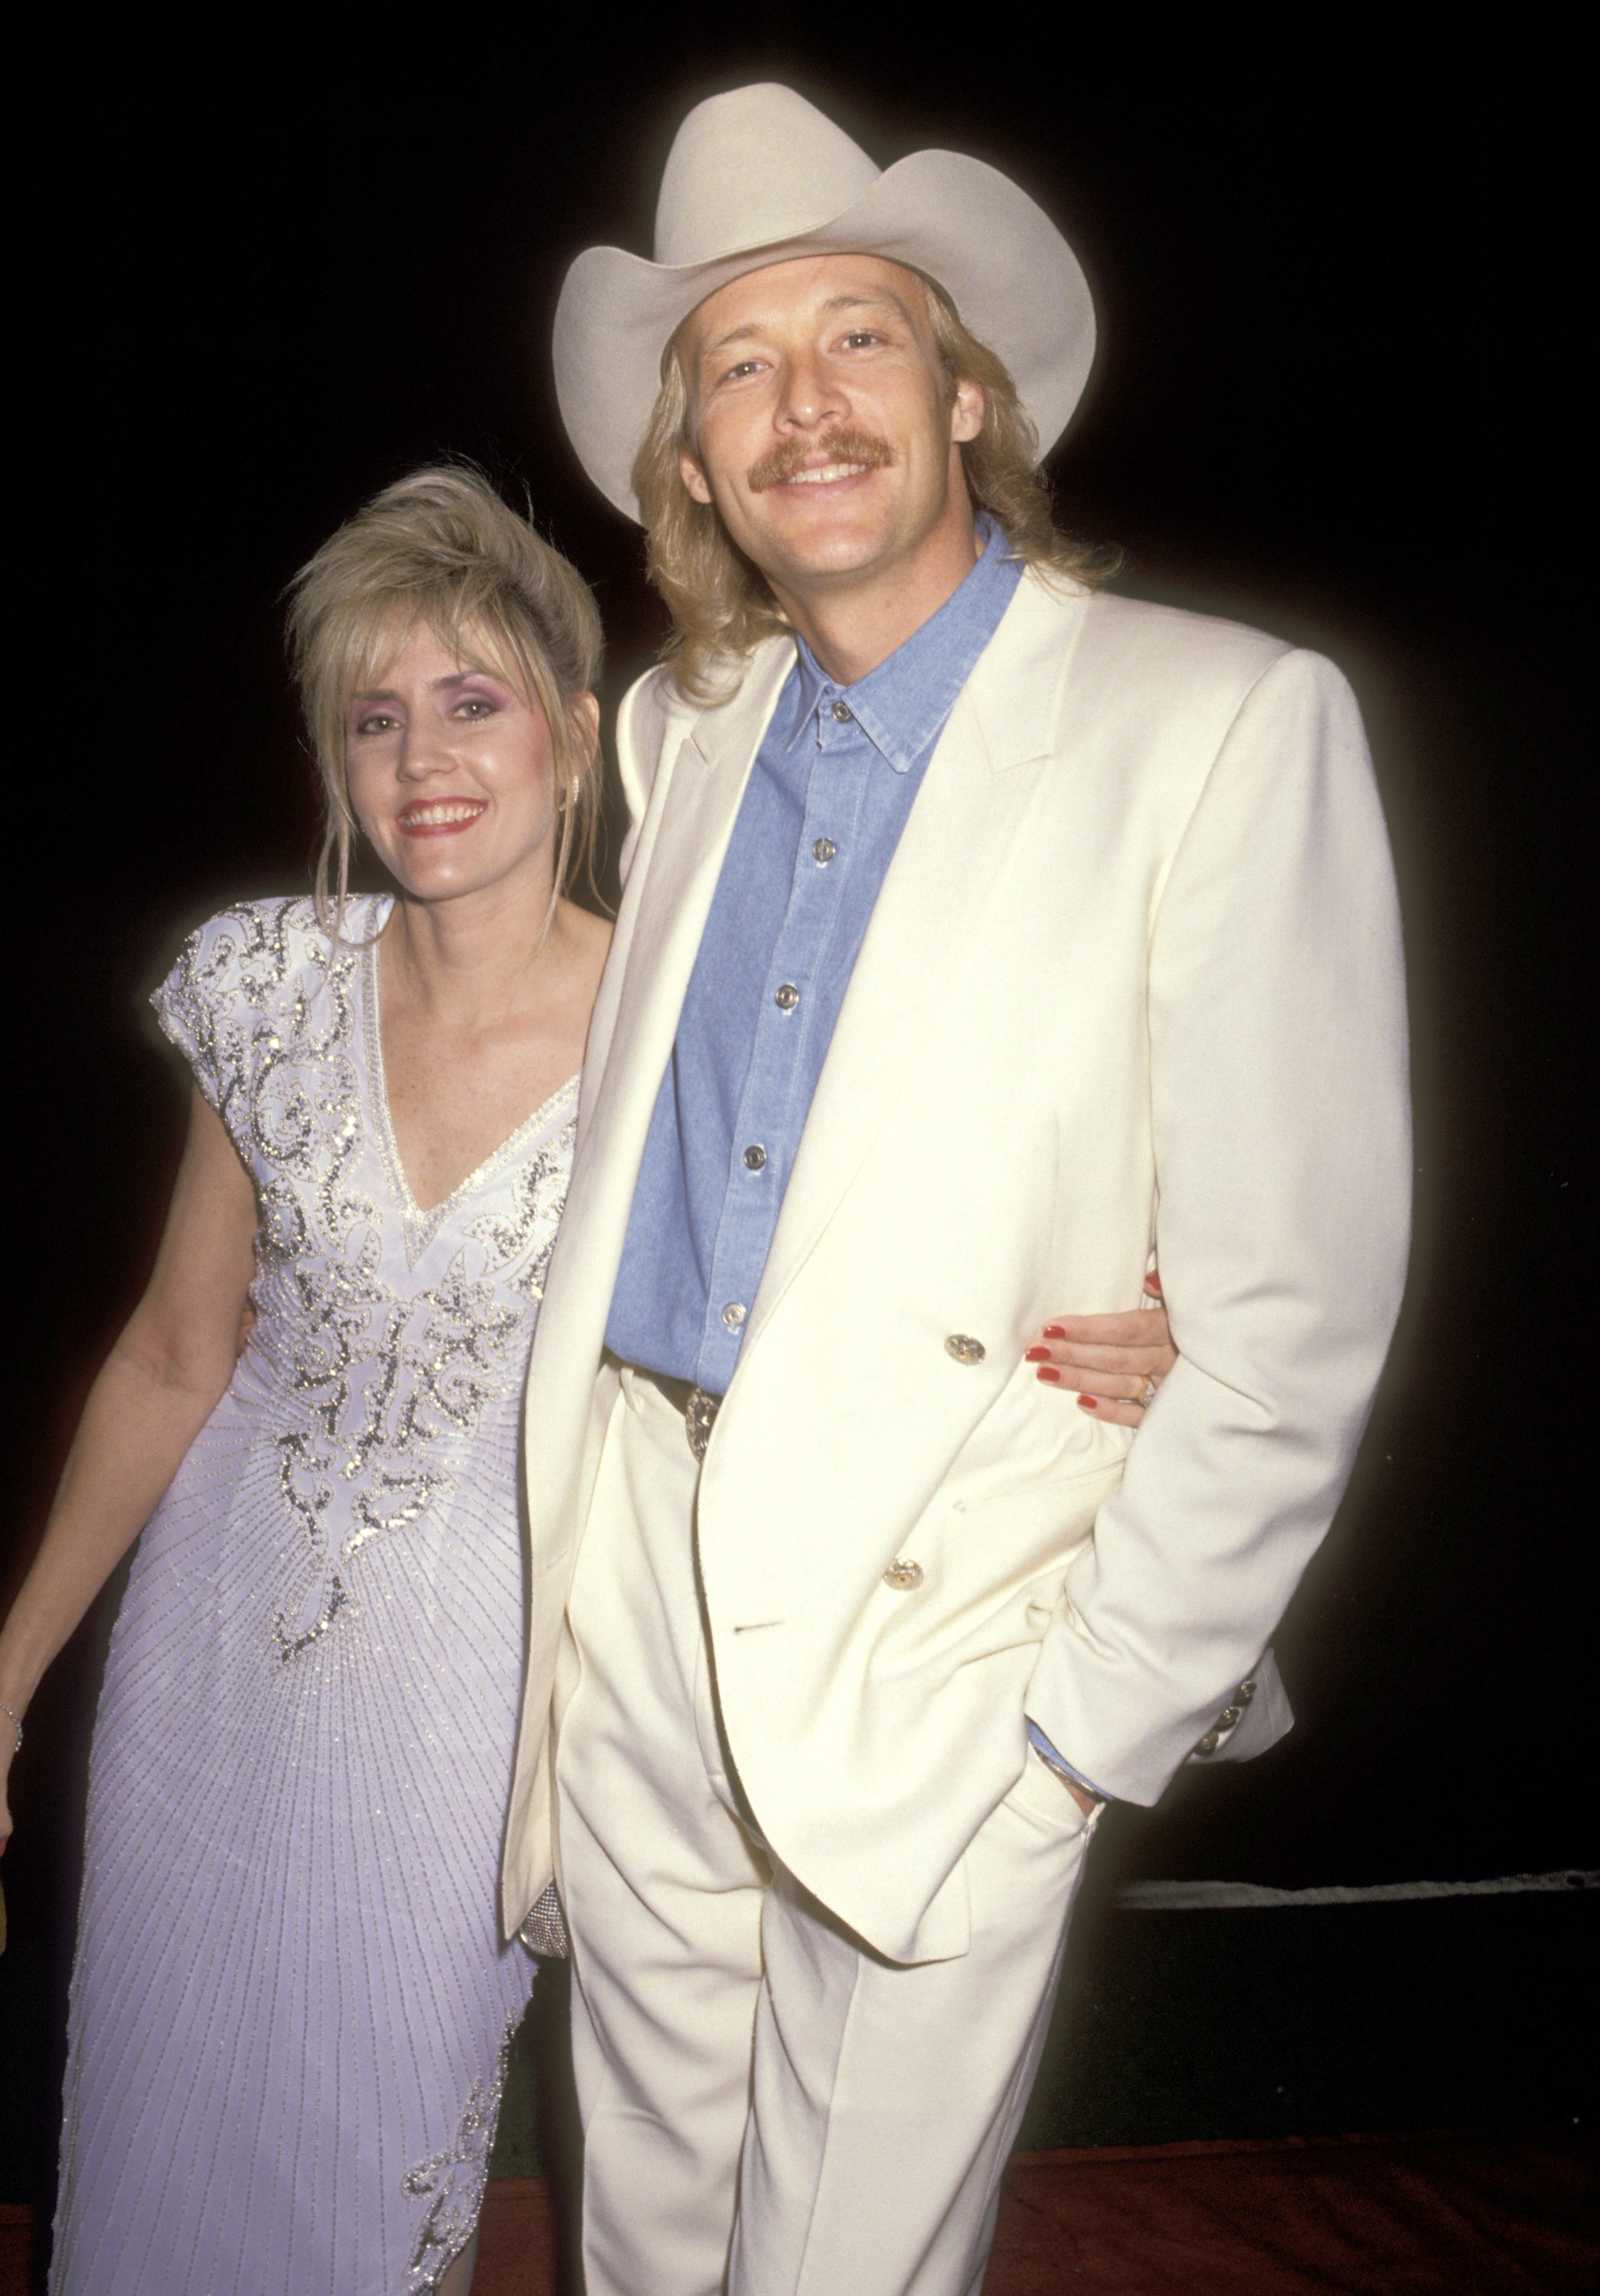 Alan and Denise Jackson at the 18th Annual American Music Awards on January 28, 1991 | Source: Getty Images